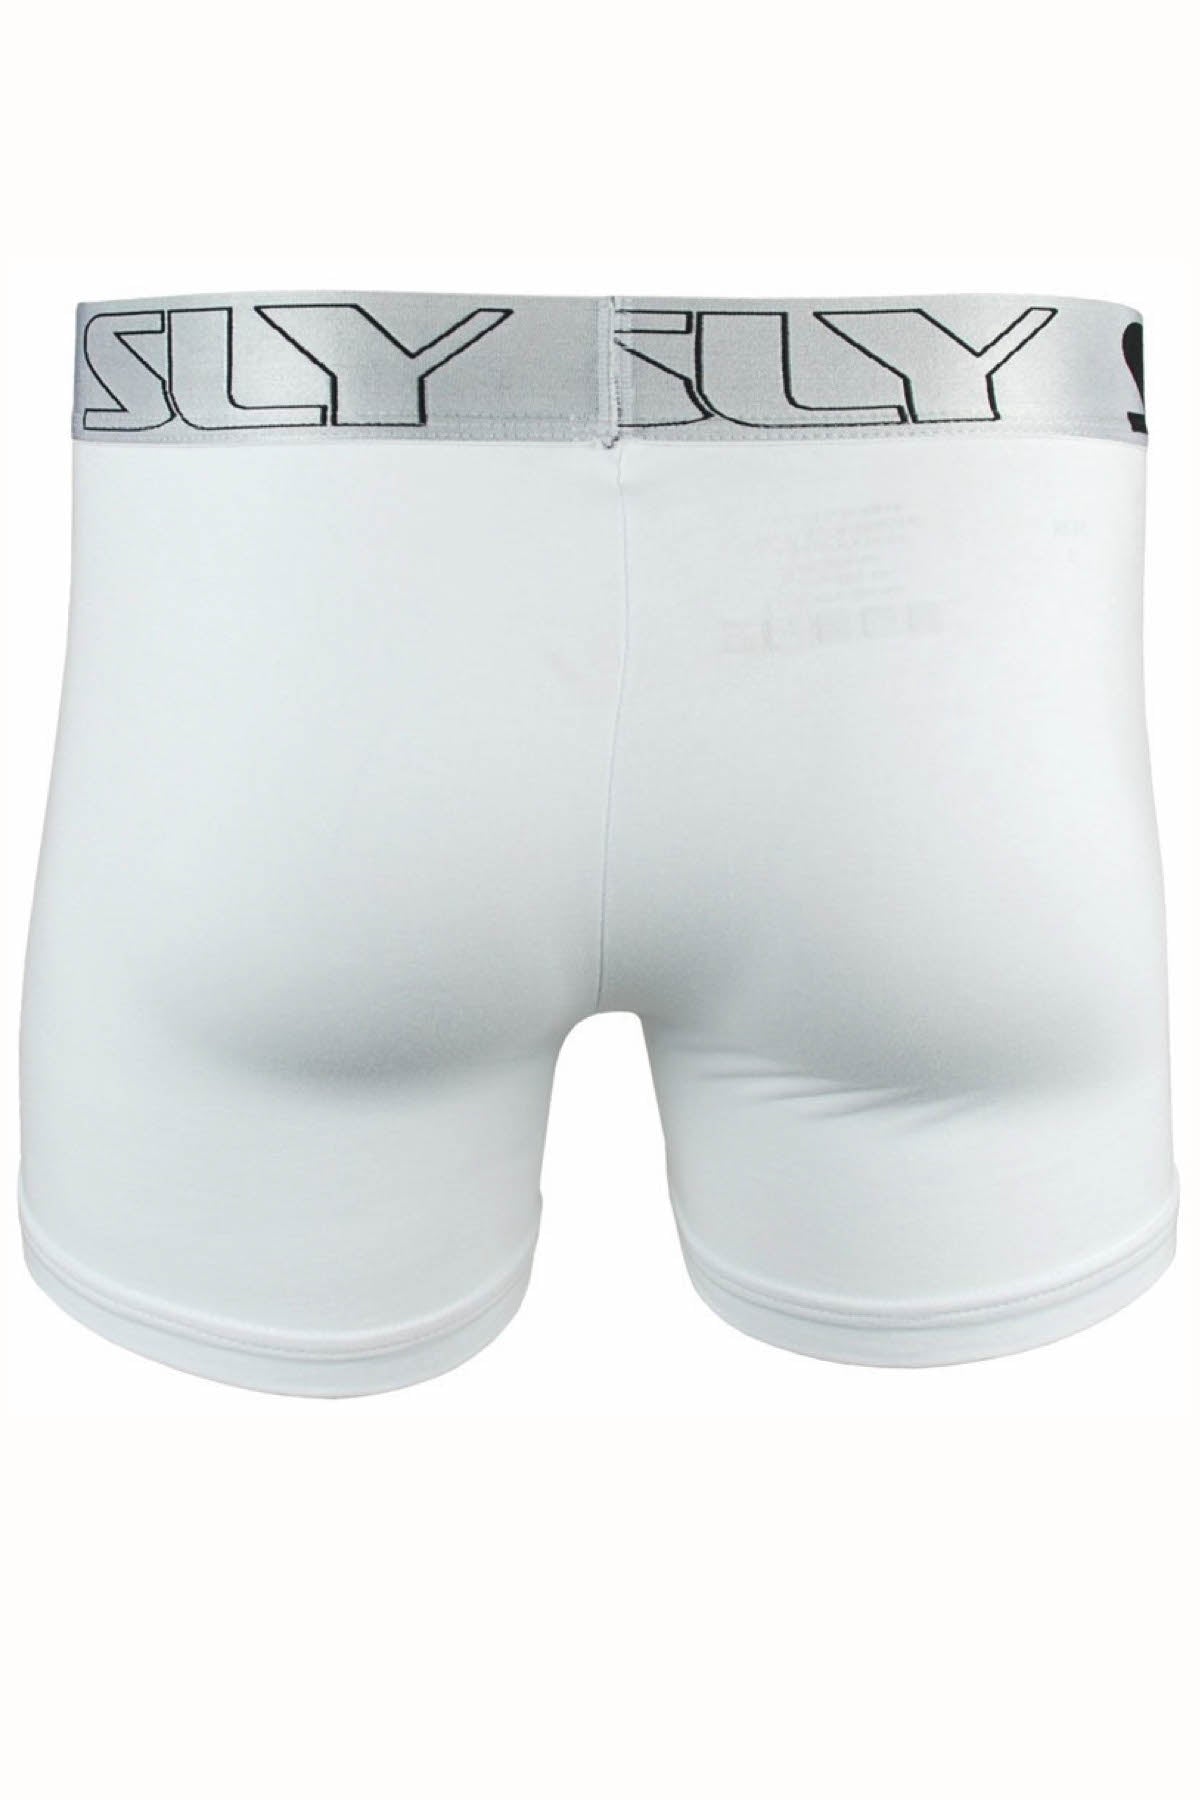 Sly White Solid Boxer Brief